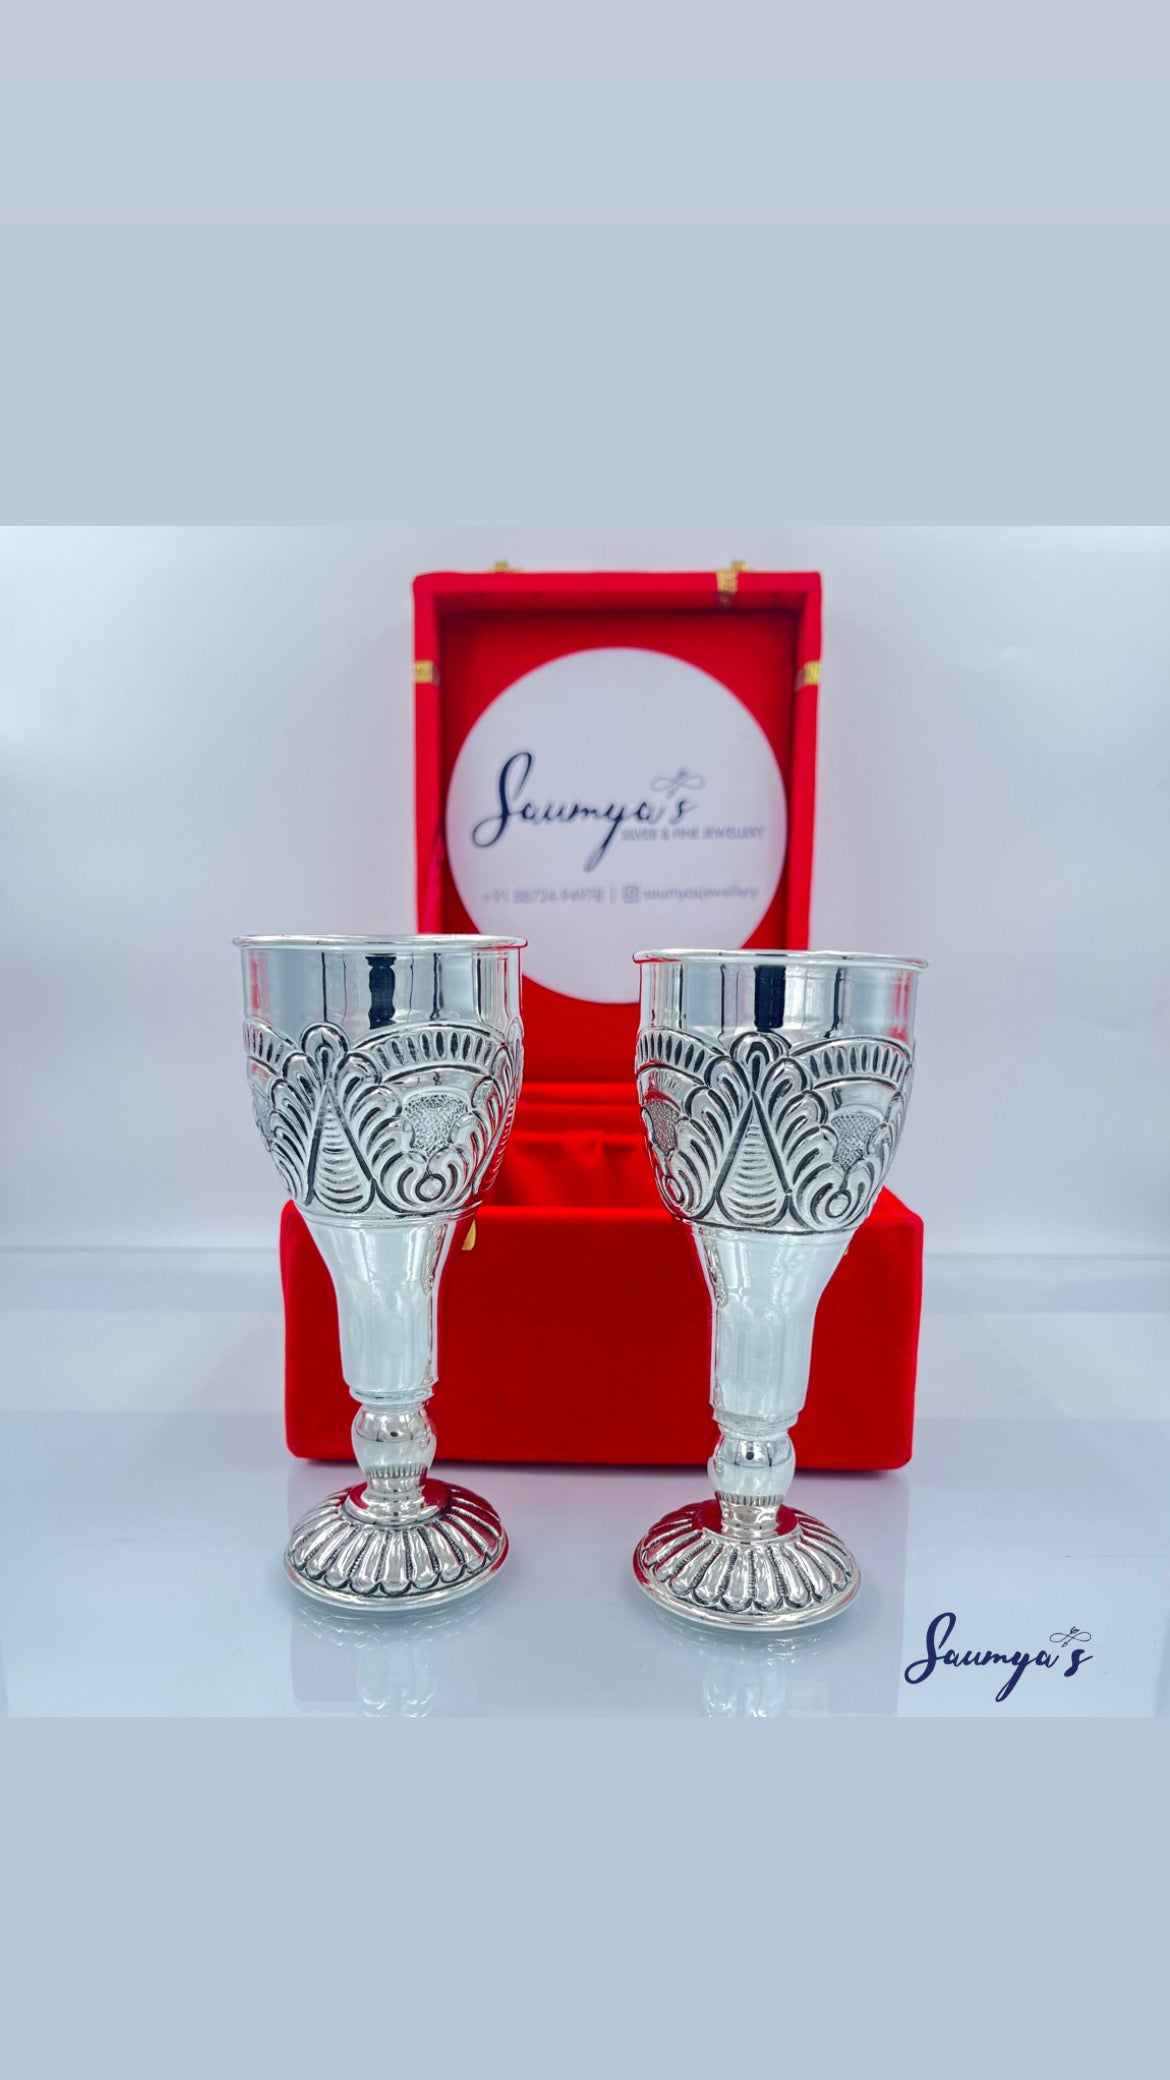 Hand Crafted Wine Glasses in pure 92.5% Silver!